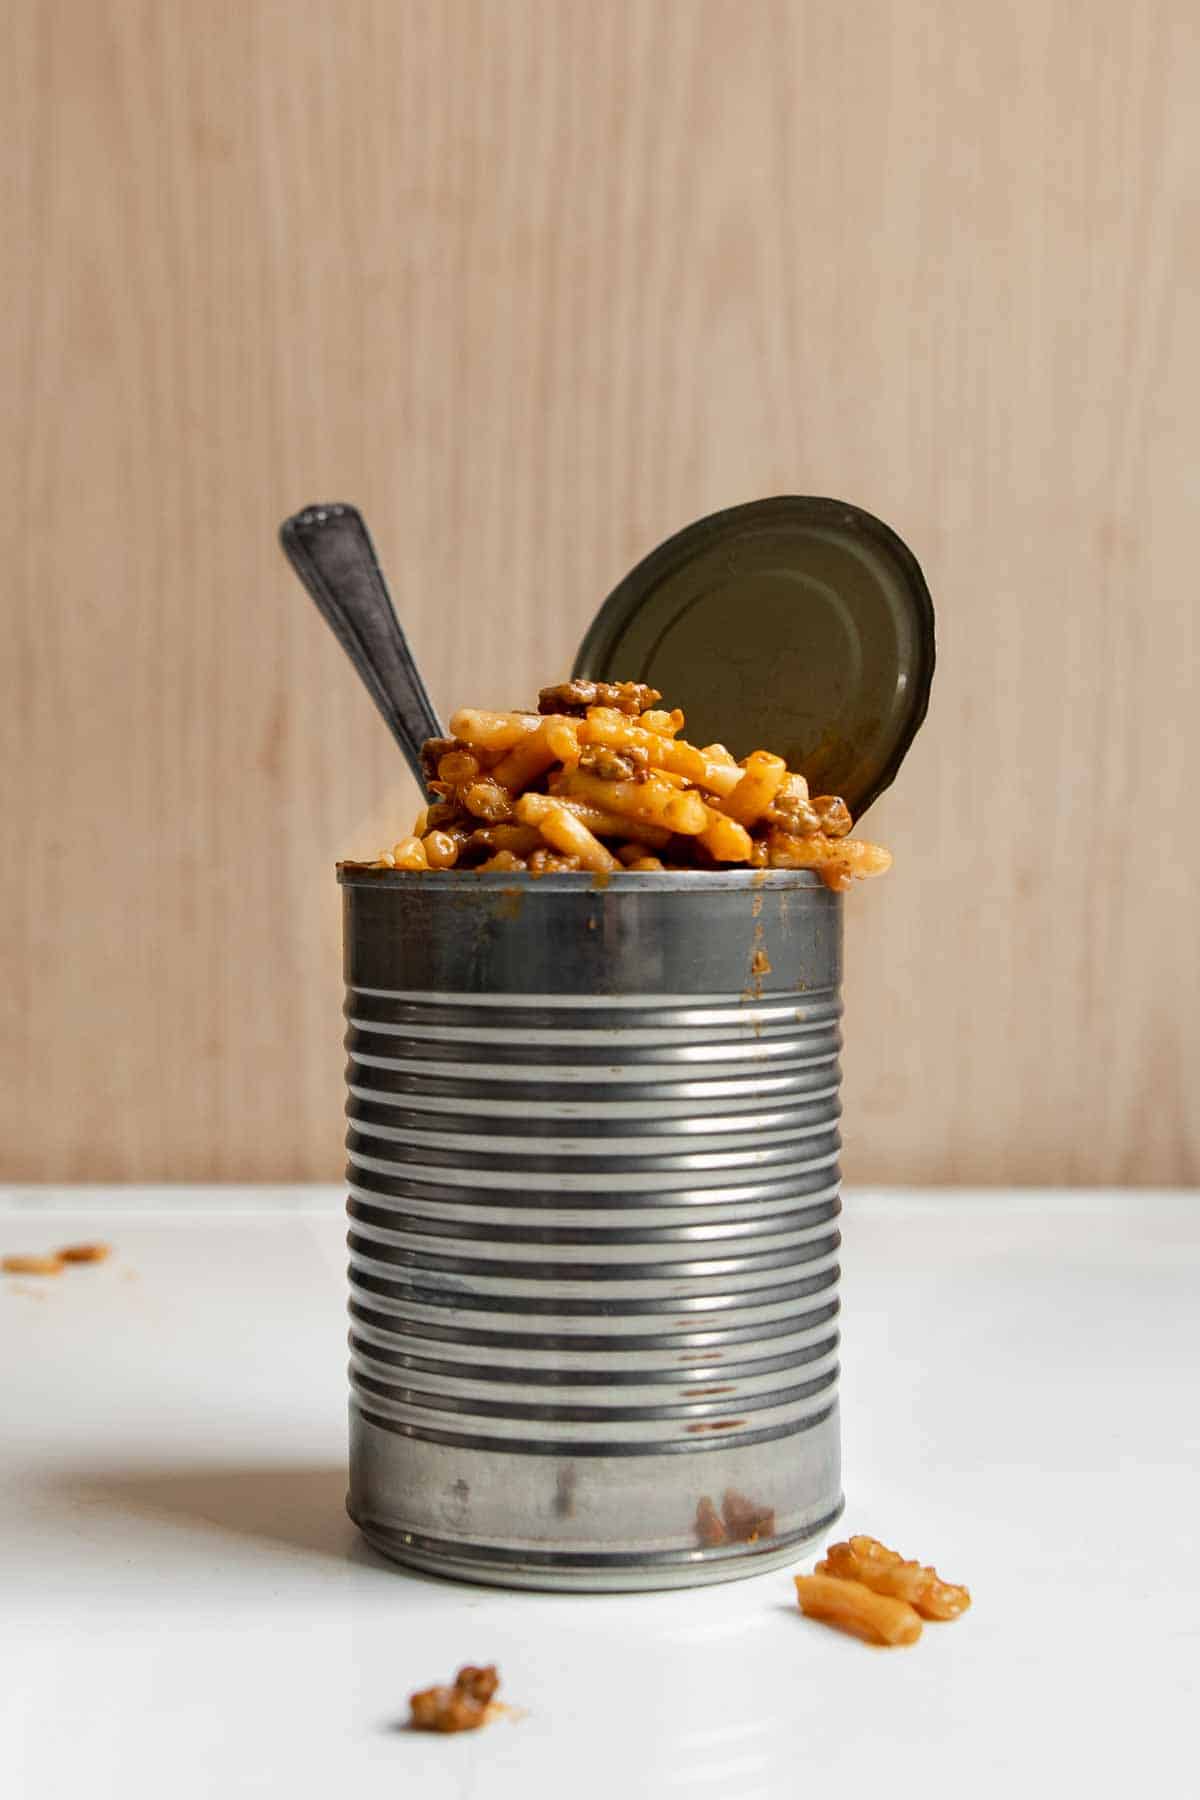 homemade beefaroni in a can with a fork.